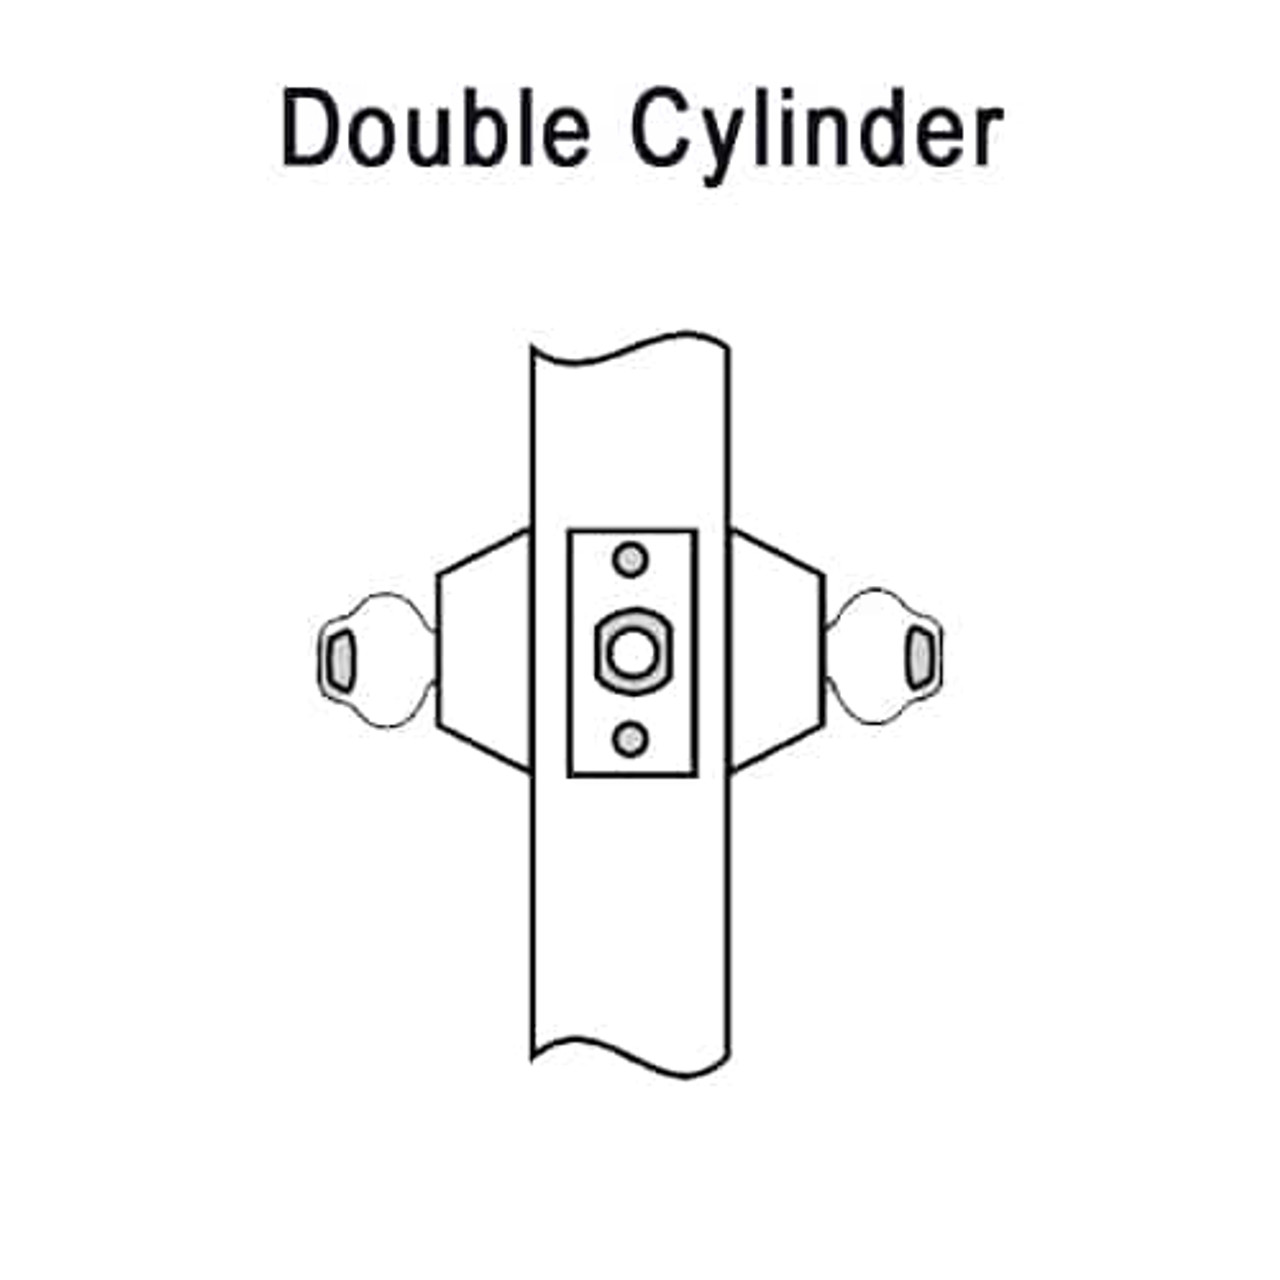 DL3012-612 Corbin DL3000 Series Cylindrical Deadlocks with Double Cylinder in Satin Bronze